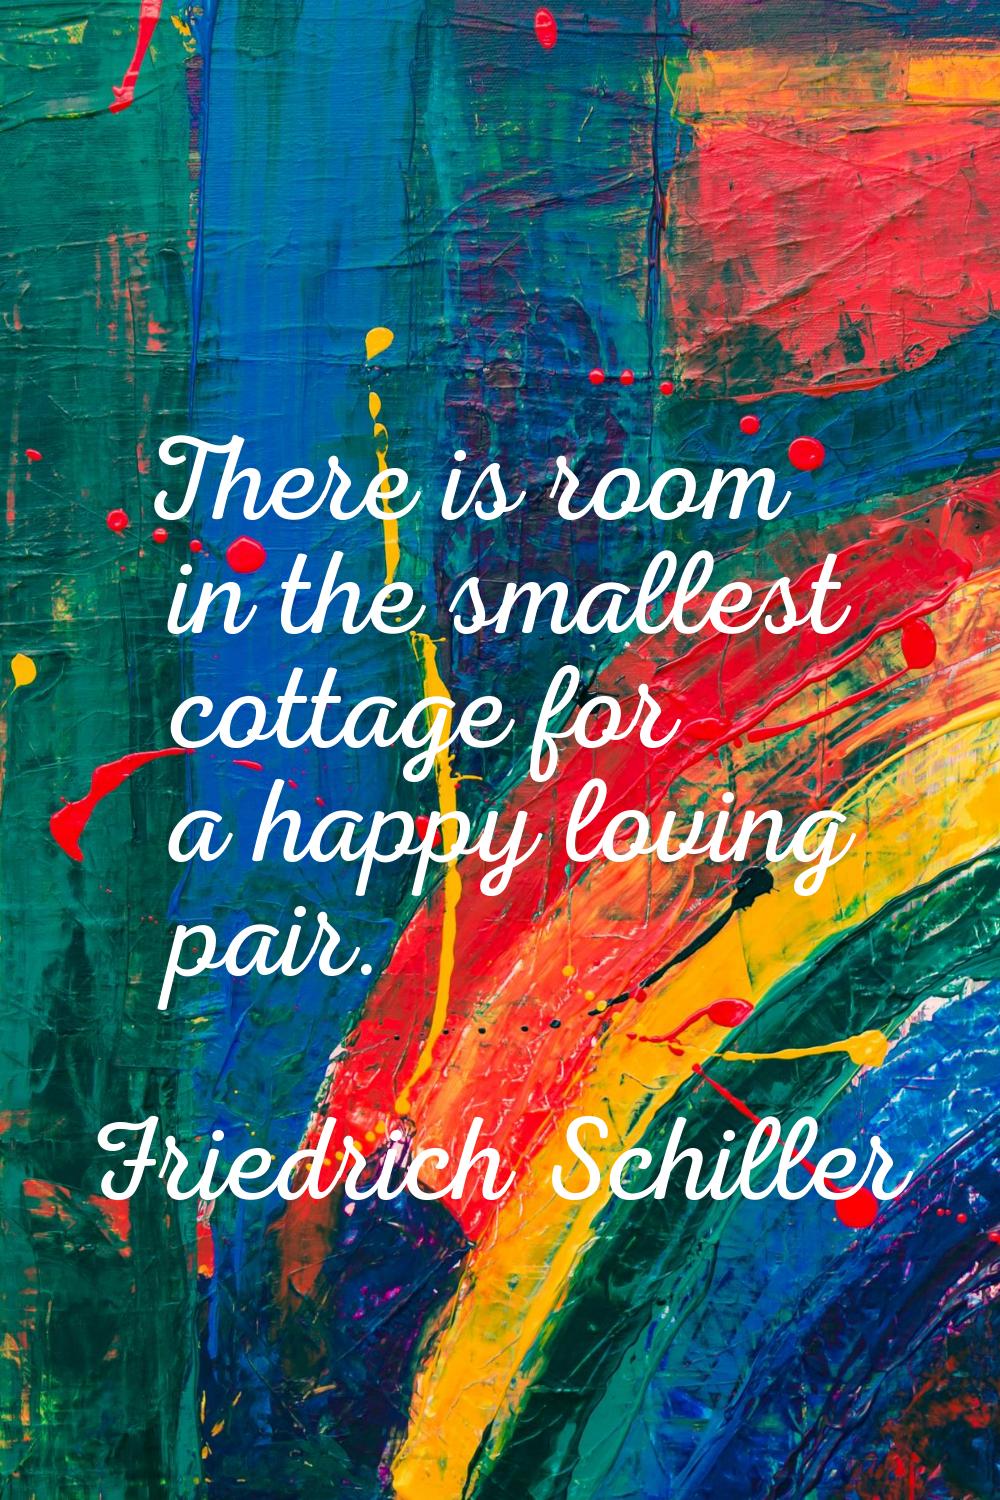 There is room in the smallest cottage for a happy loving pair.